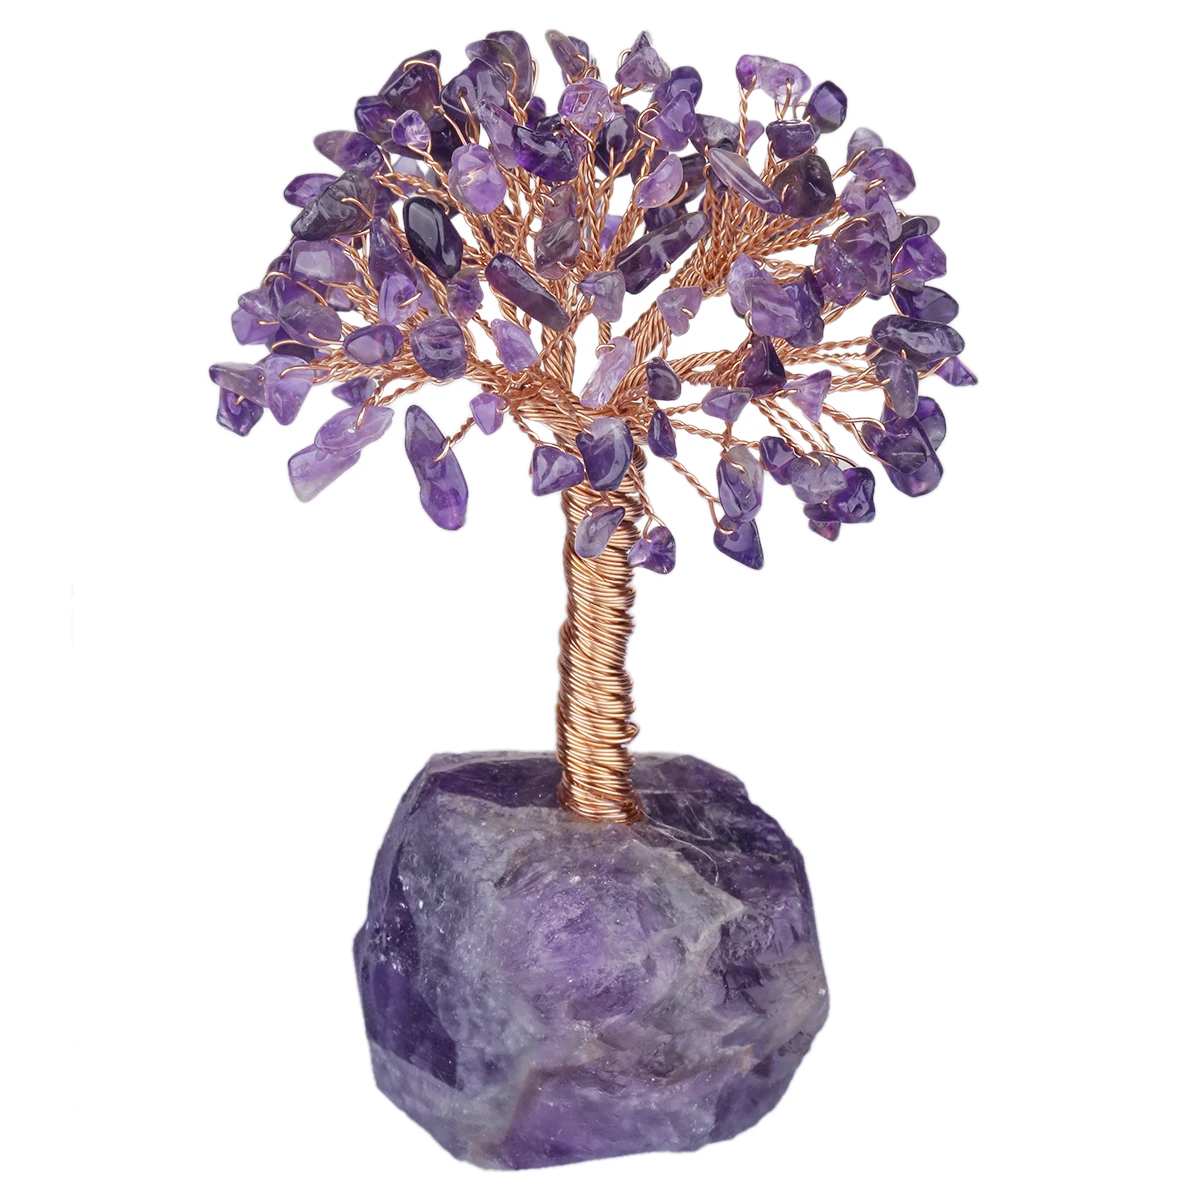 Natural Amethyst Crystal Tree With Rough Stone Base Healing Gemstone Chips Bonsai Money Tree Decoration For Wealth and Luck natural crystal stone star moon shape hanging ornament reiki healing gemstone wall decor for window home decoration